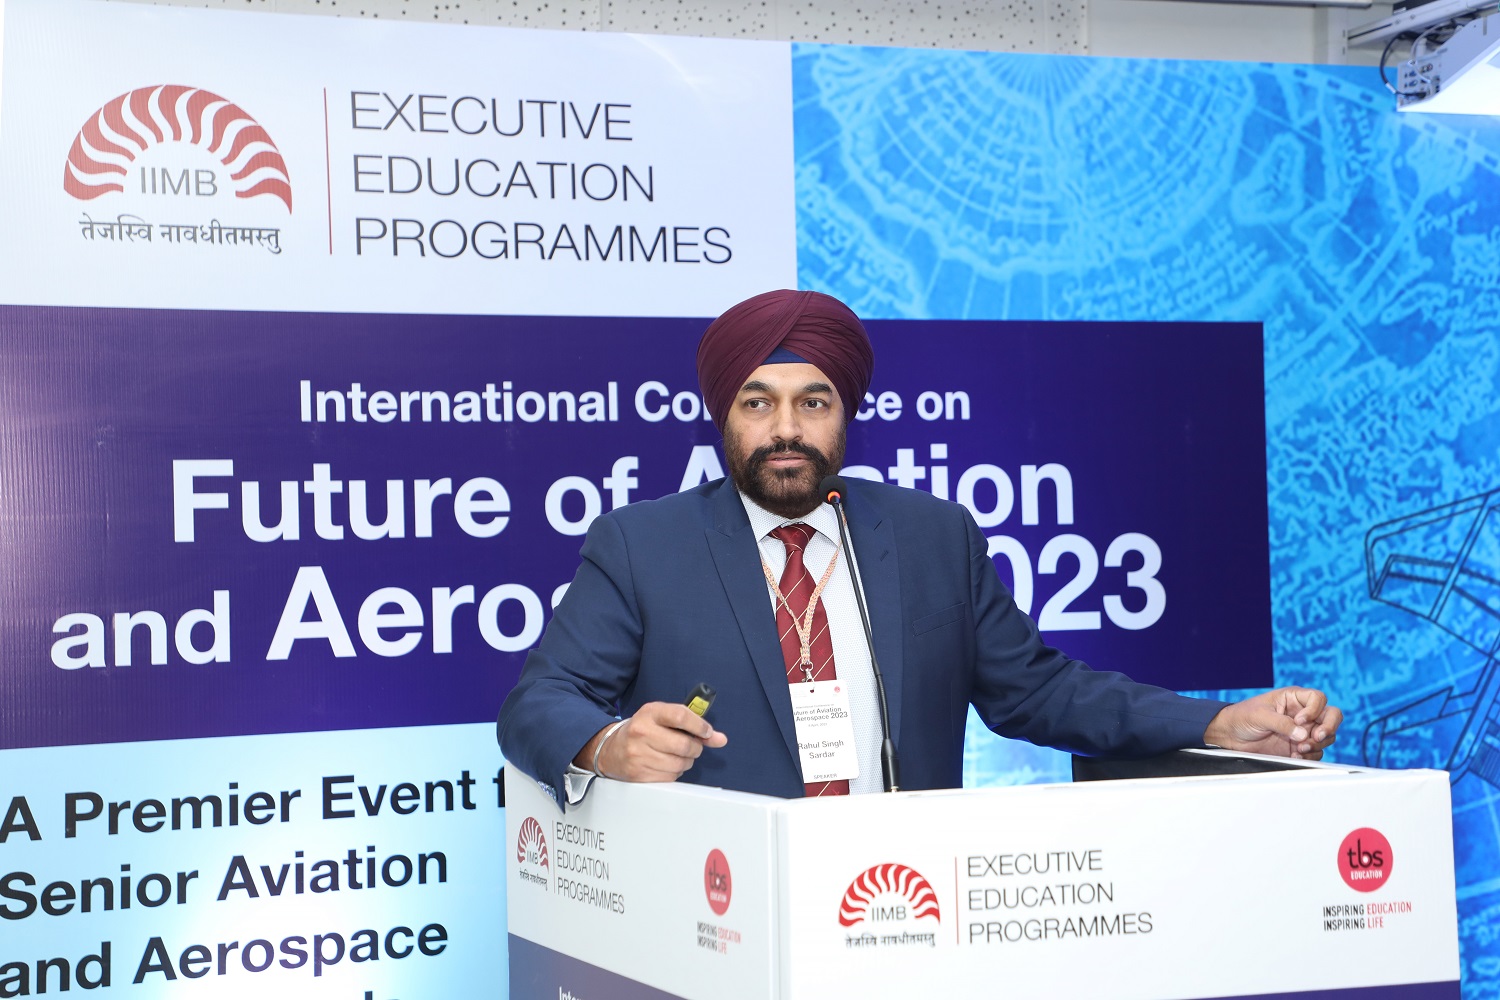 Dr. Rahul Singh Sardar, Co-founder and Director, International Critical Care Air Transfer Team, spoke on 'Future of Technology in Aerospace: Start-ups and Make in India Policy' at FOAA 2023.